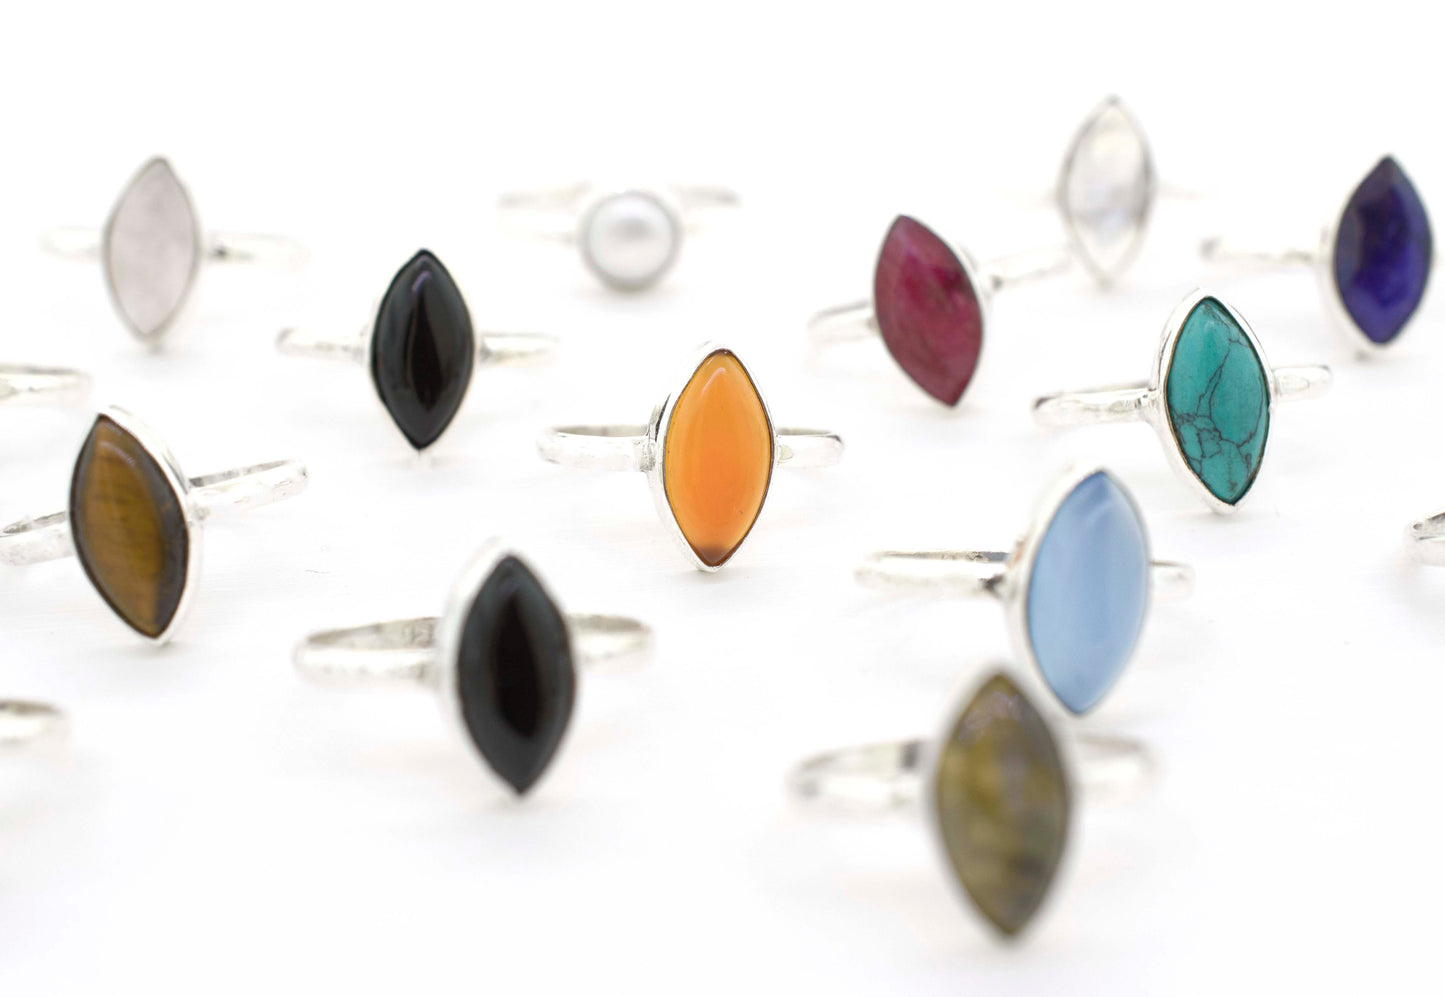 A group of Simple Marquise Shaped Gemstone Rings with different colored stones.